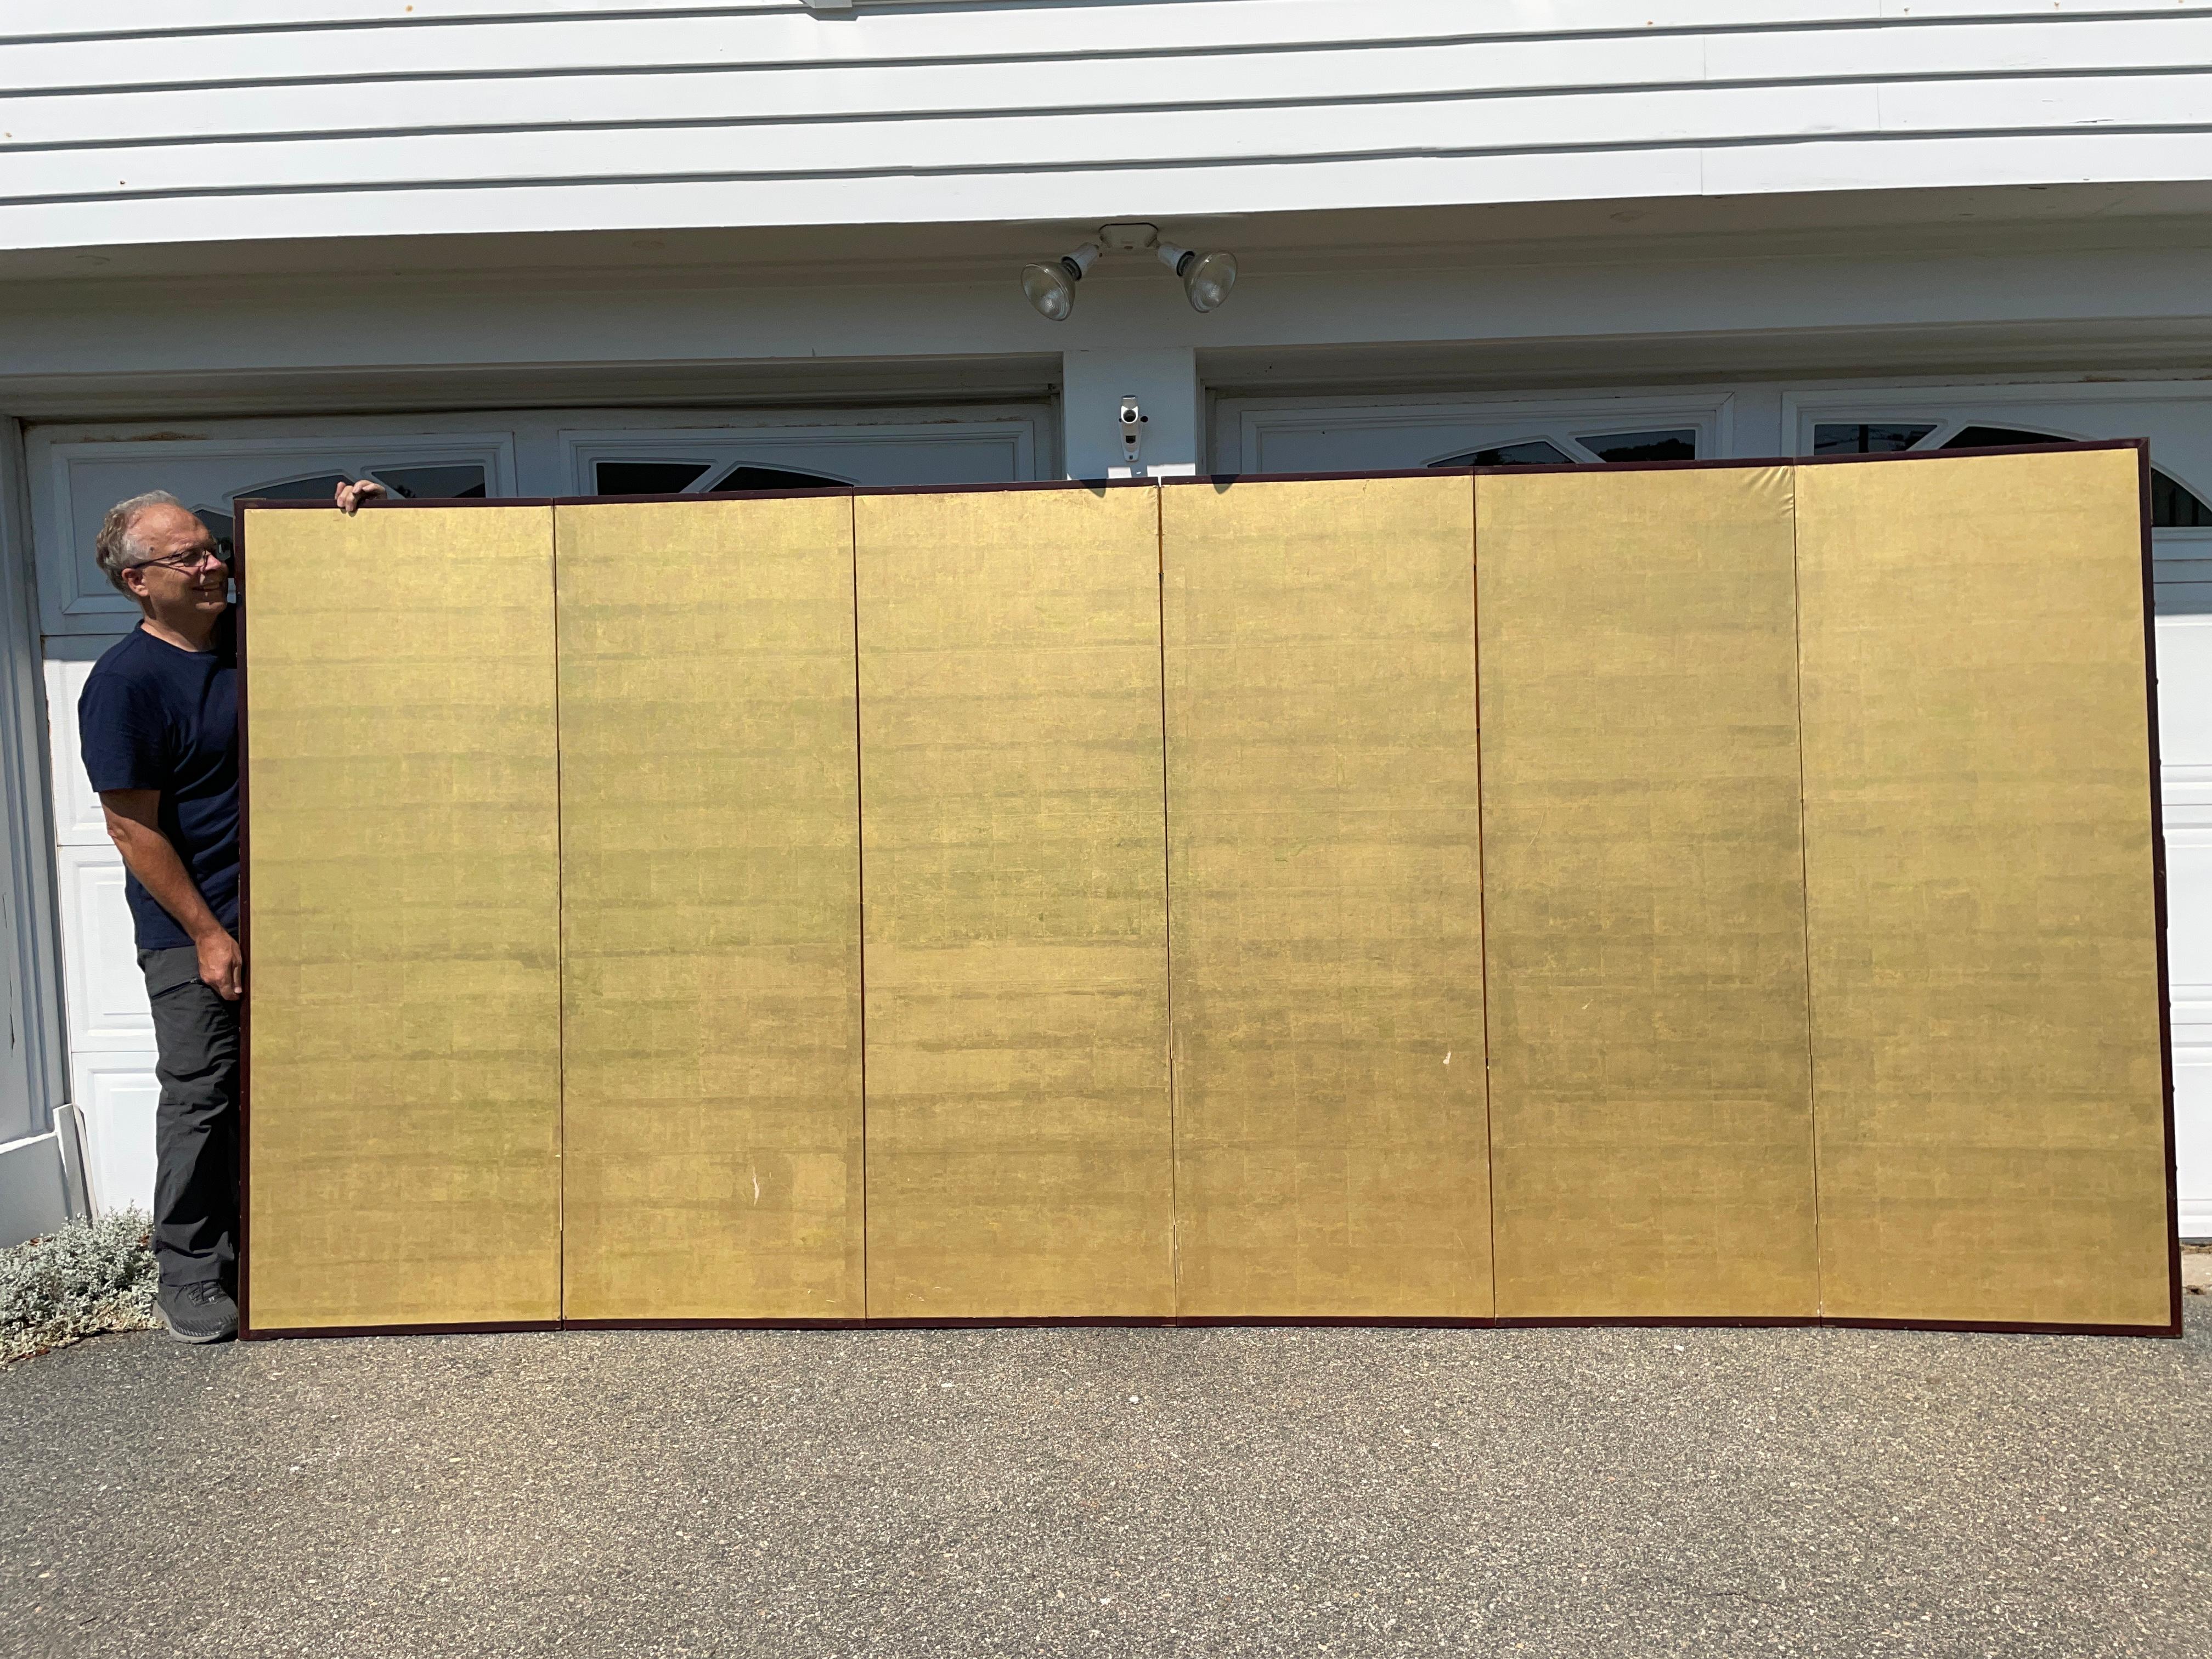 From our recent Japanese Acquisitions

One of a pair currently available

Fashioned by hand in stunning gold leaf.

Japan, a fine six-panel screen byobu carefully crafted by a professional artisan with hand applied gold leaf. This attractive screen